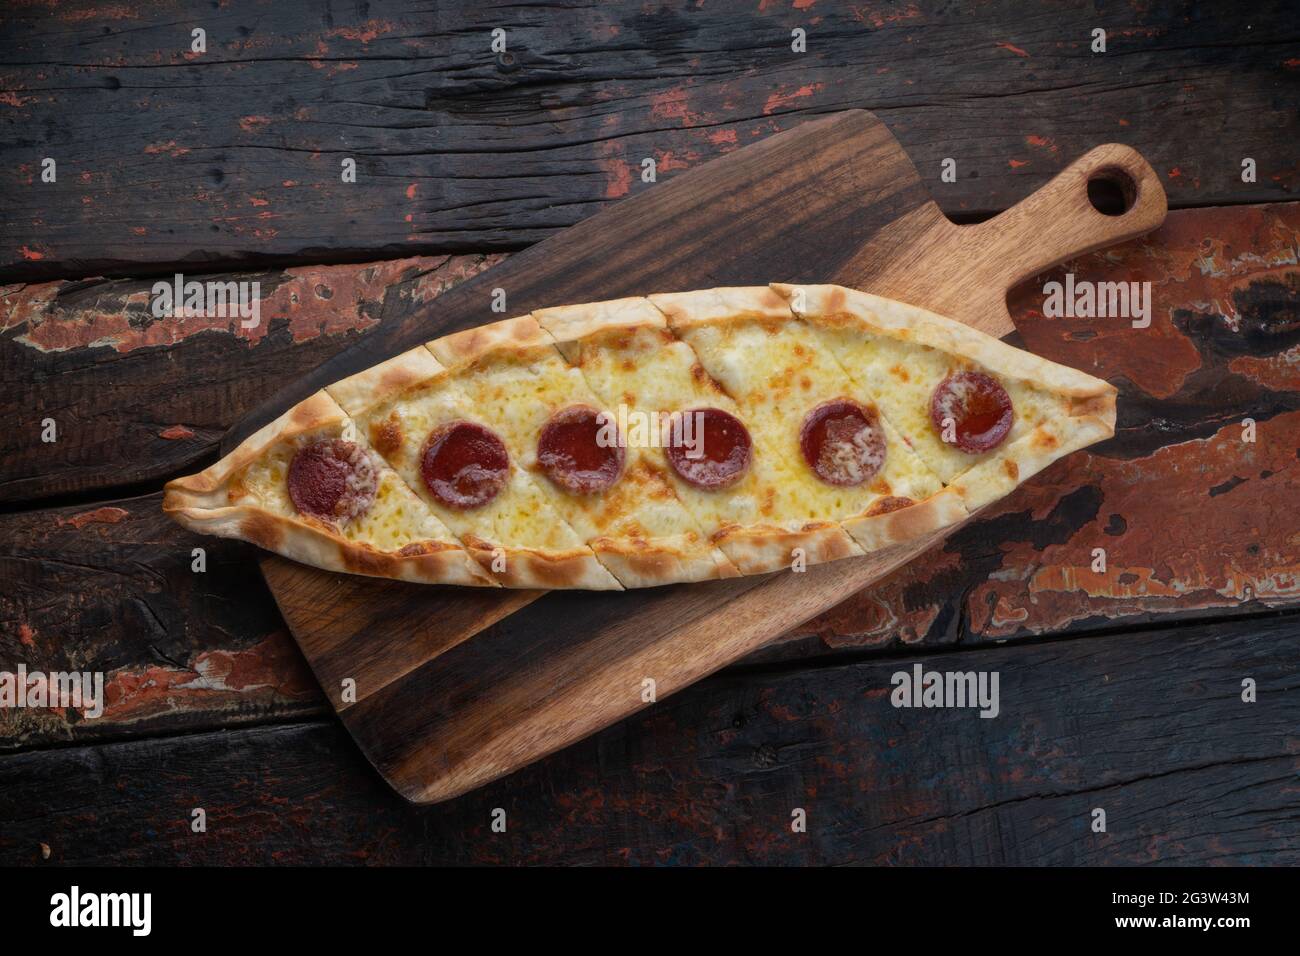 Turkish pide with sausage on rustic wooden table Stock Photo